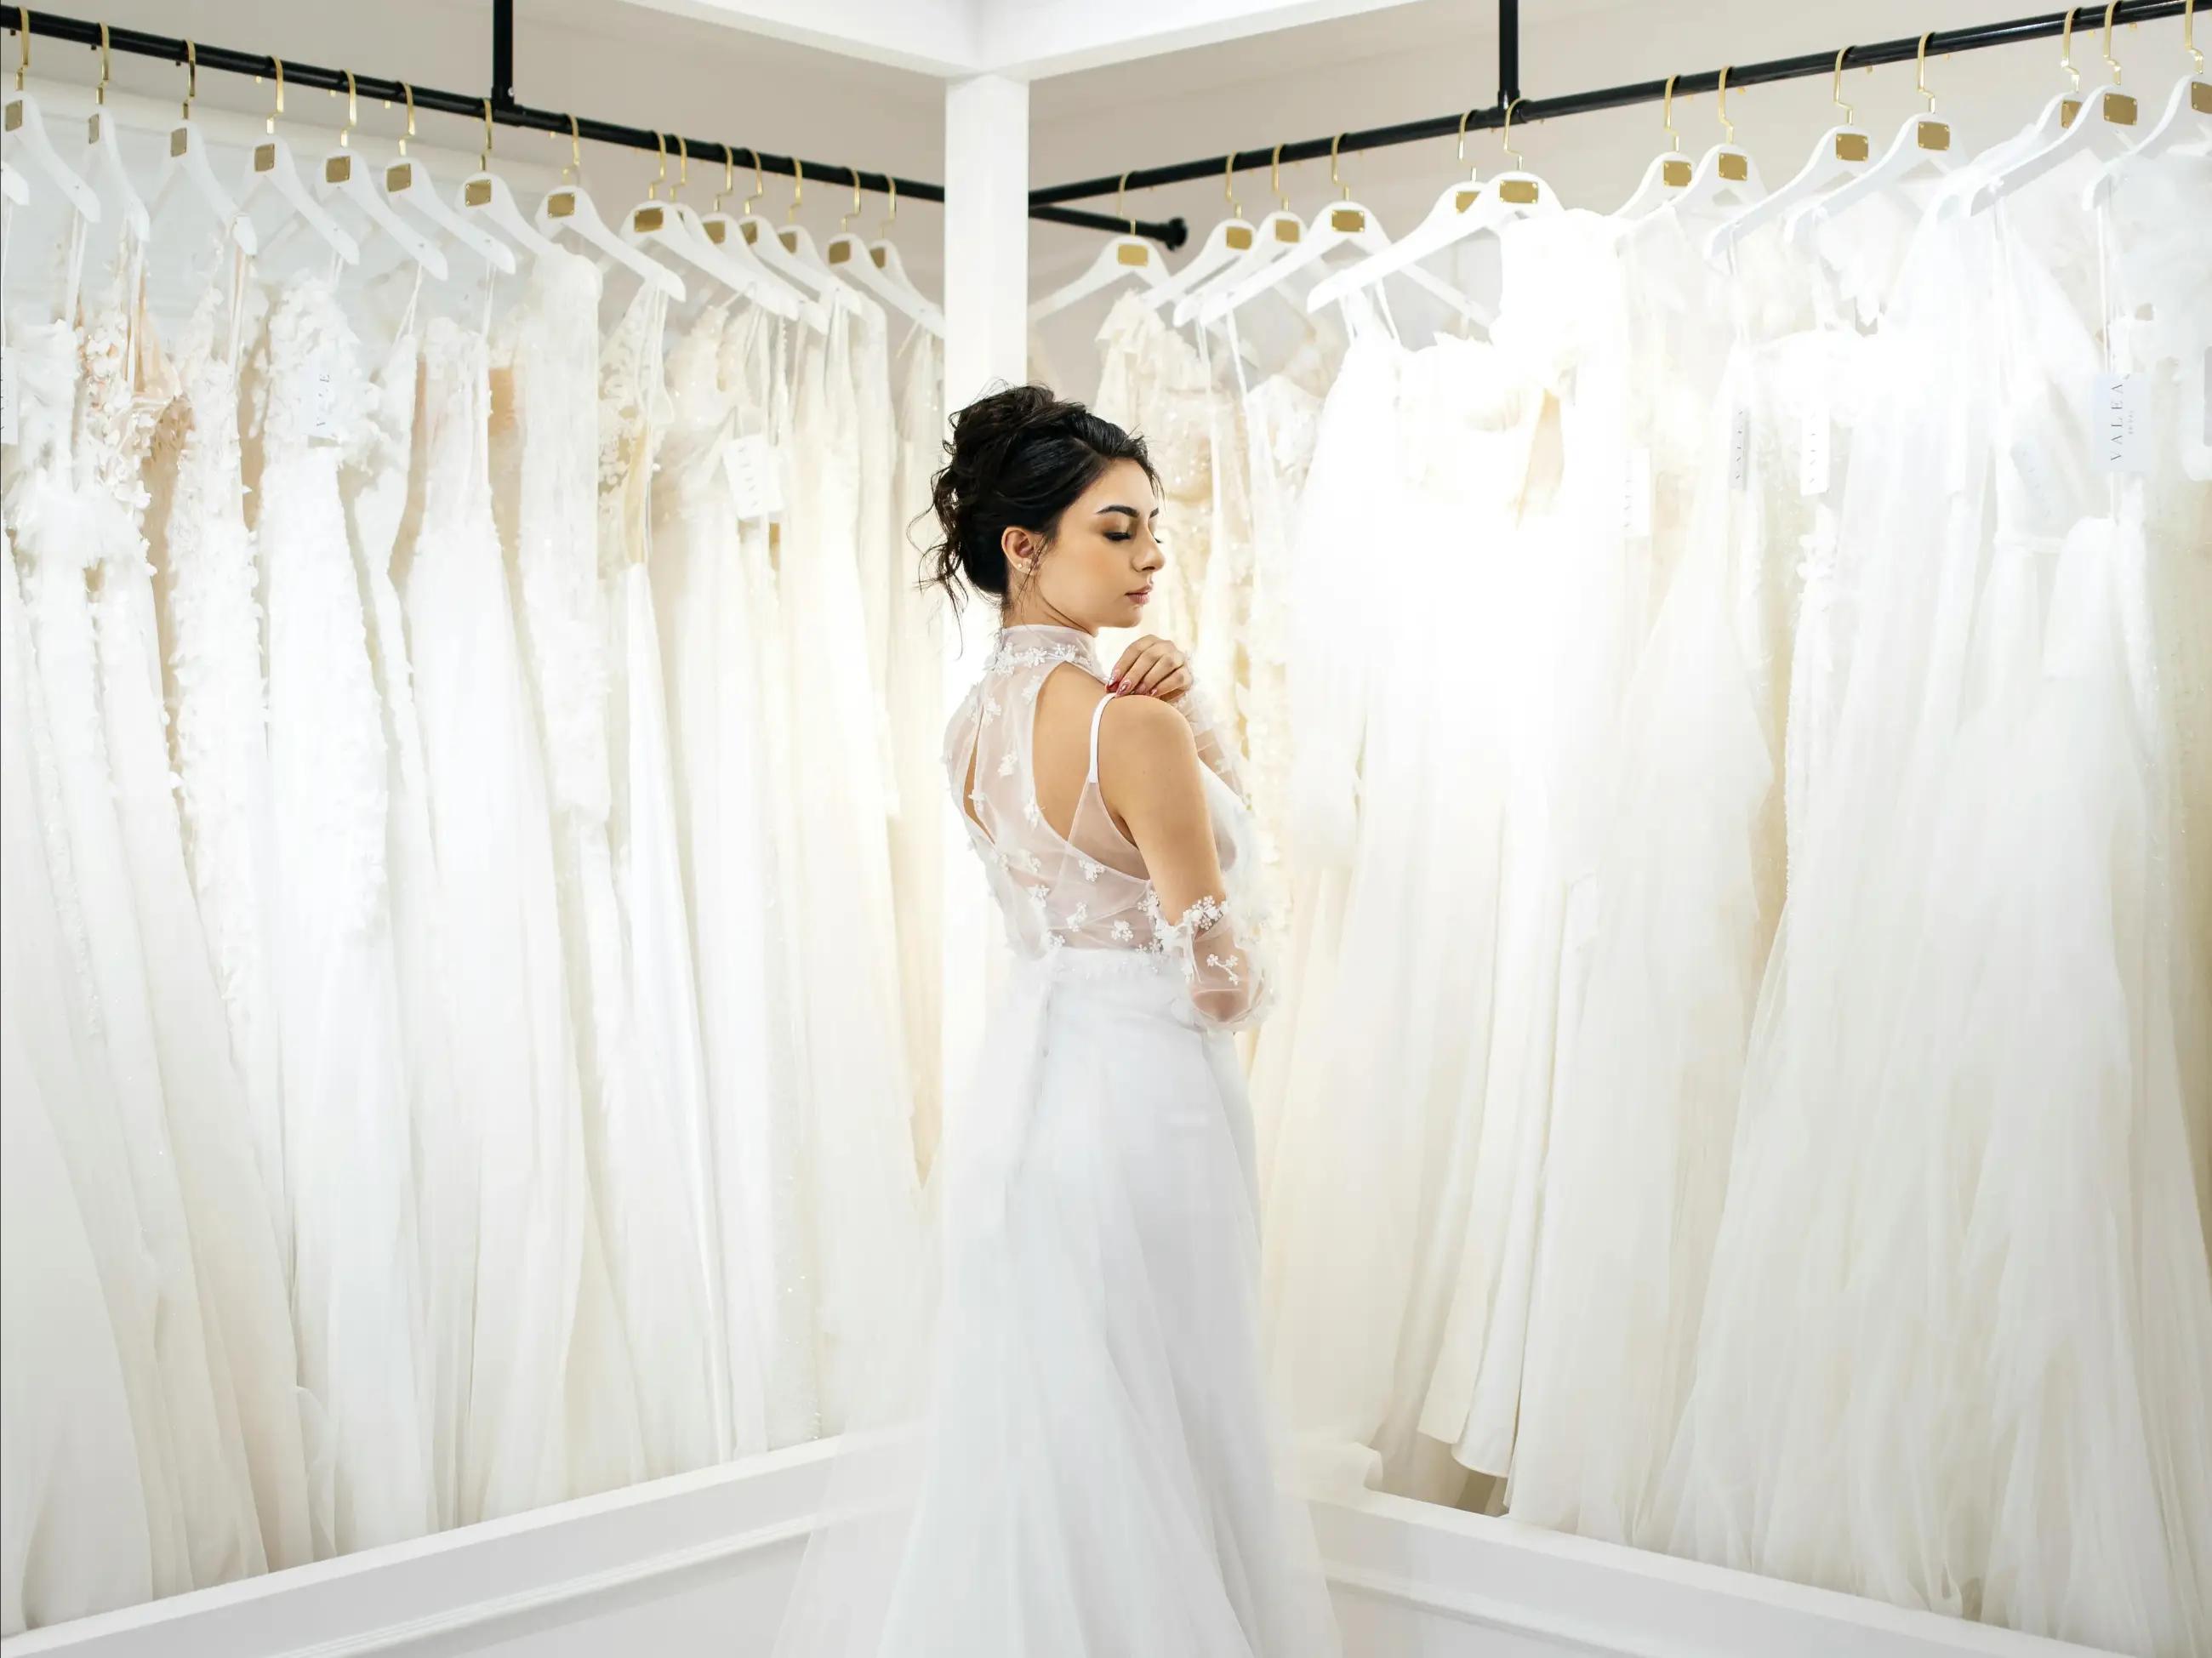 6 Bridal Fashion Mistakes Brides Make Thinking They Are Saving Money &amp; Ends Up Costing Them Image